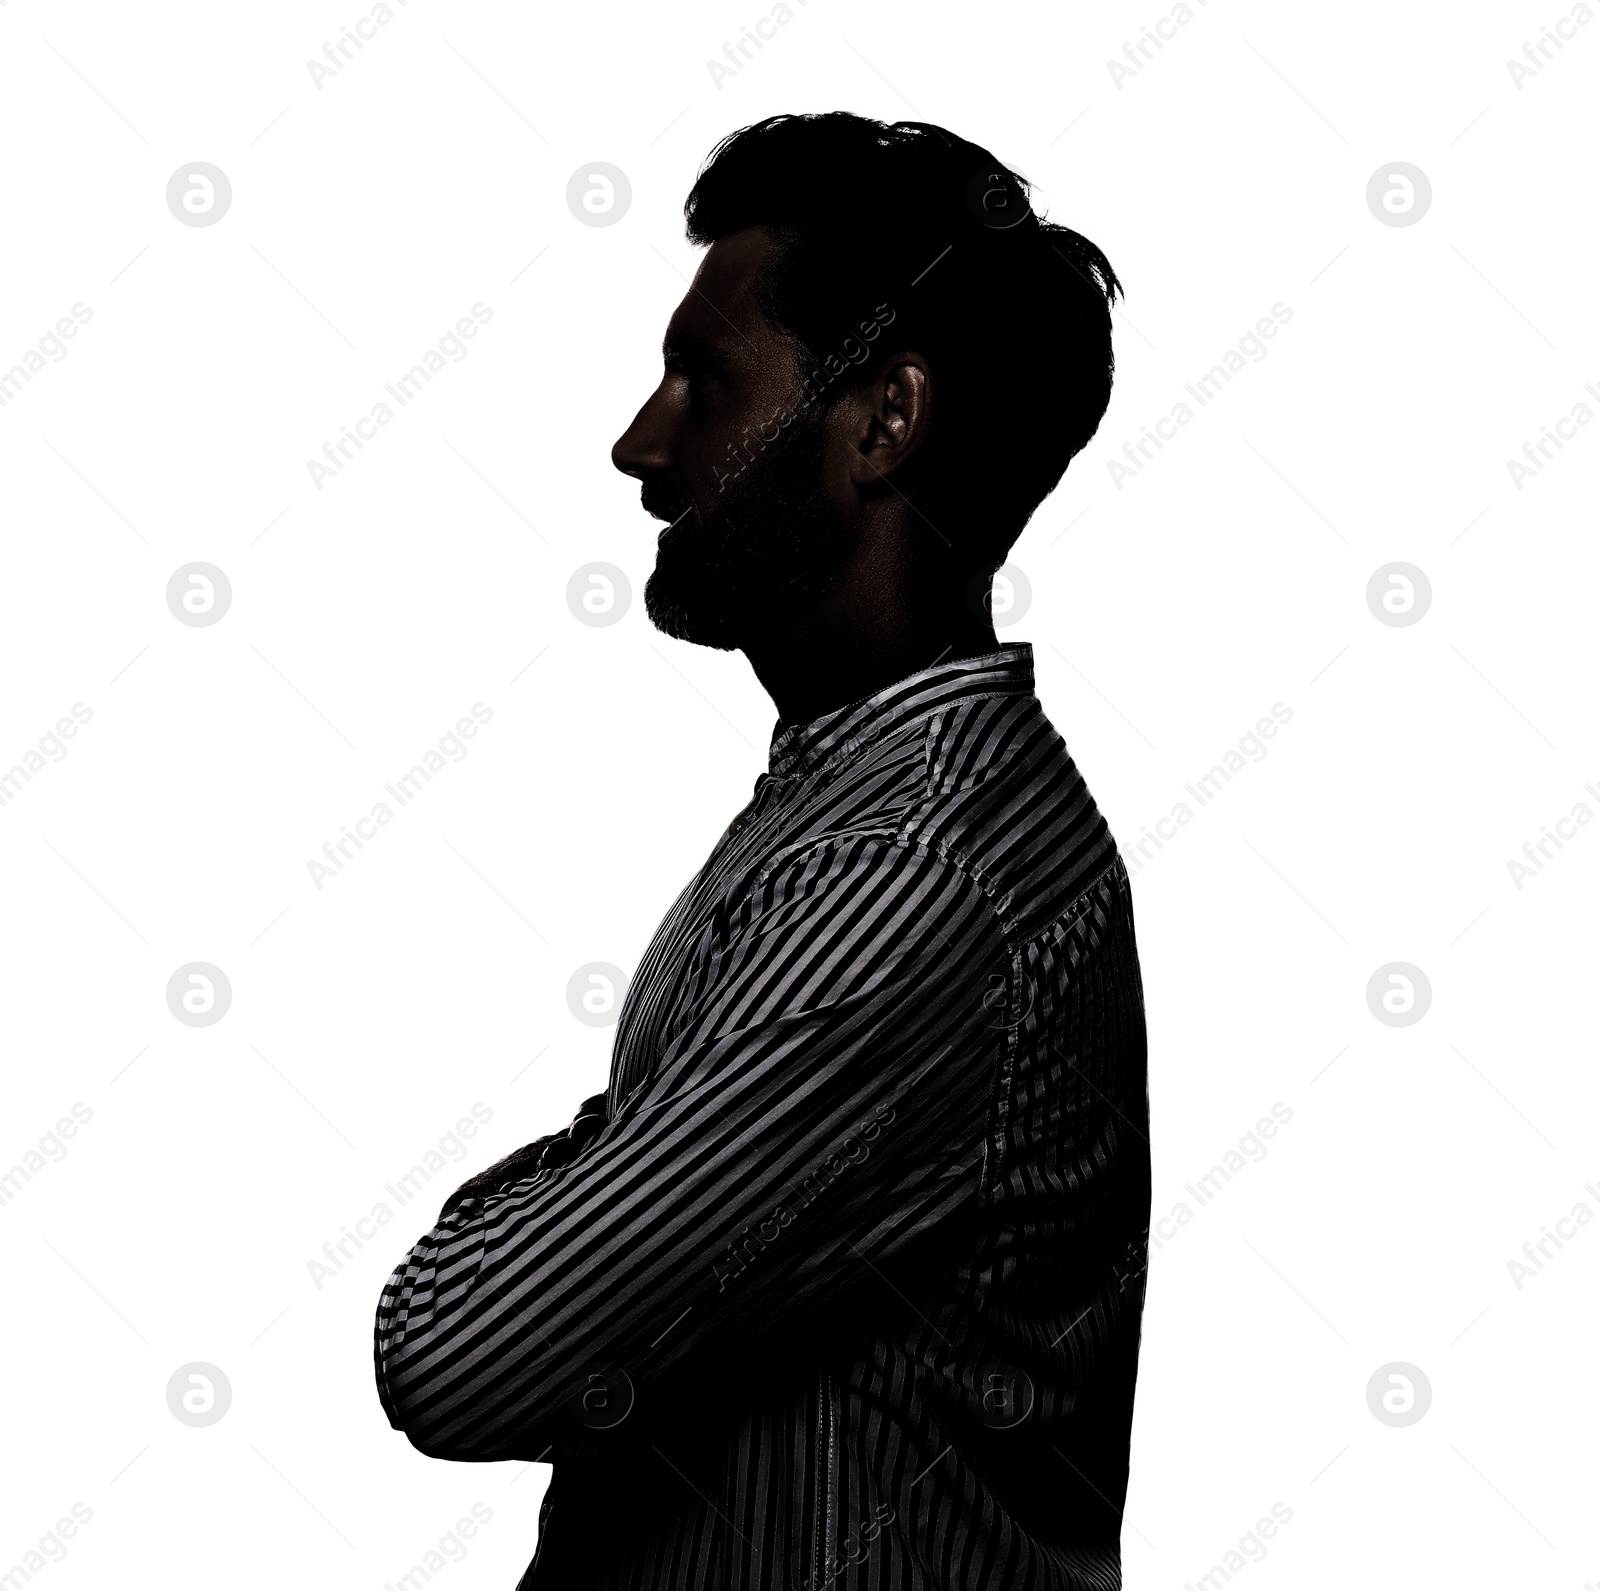 Image of Silhouette of bearded man on white background